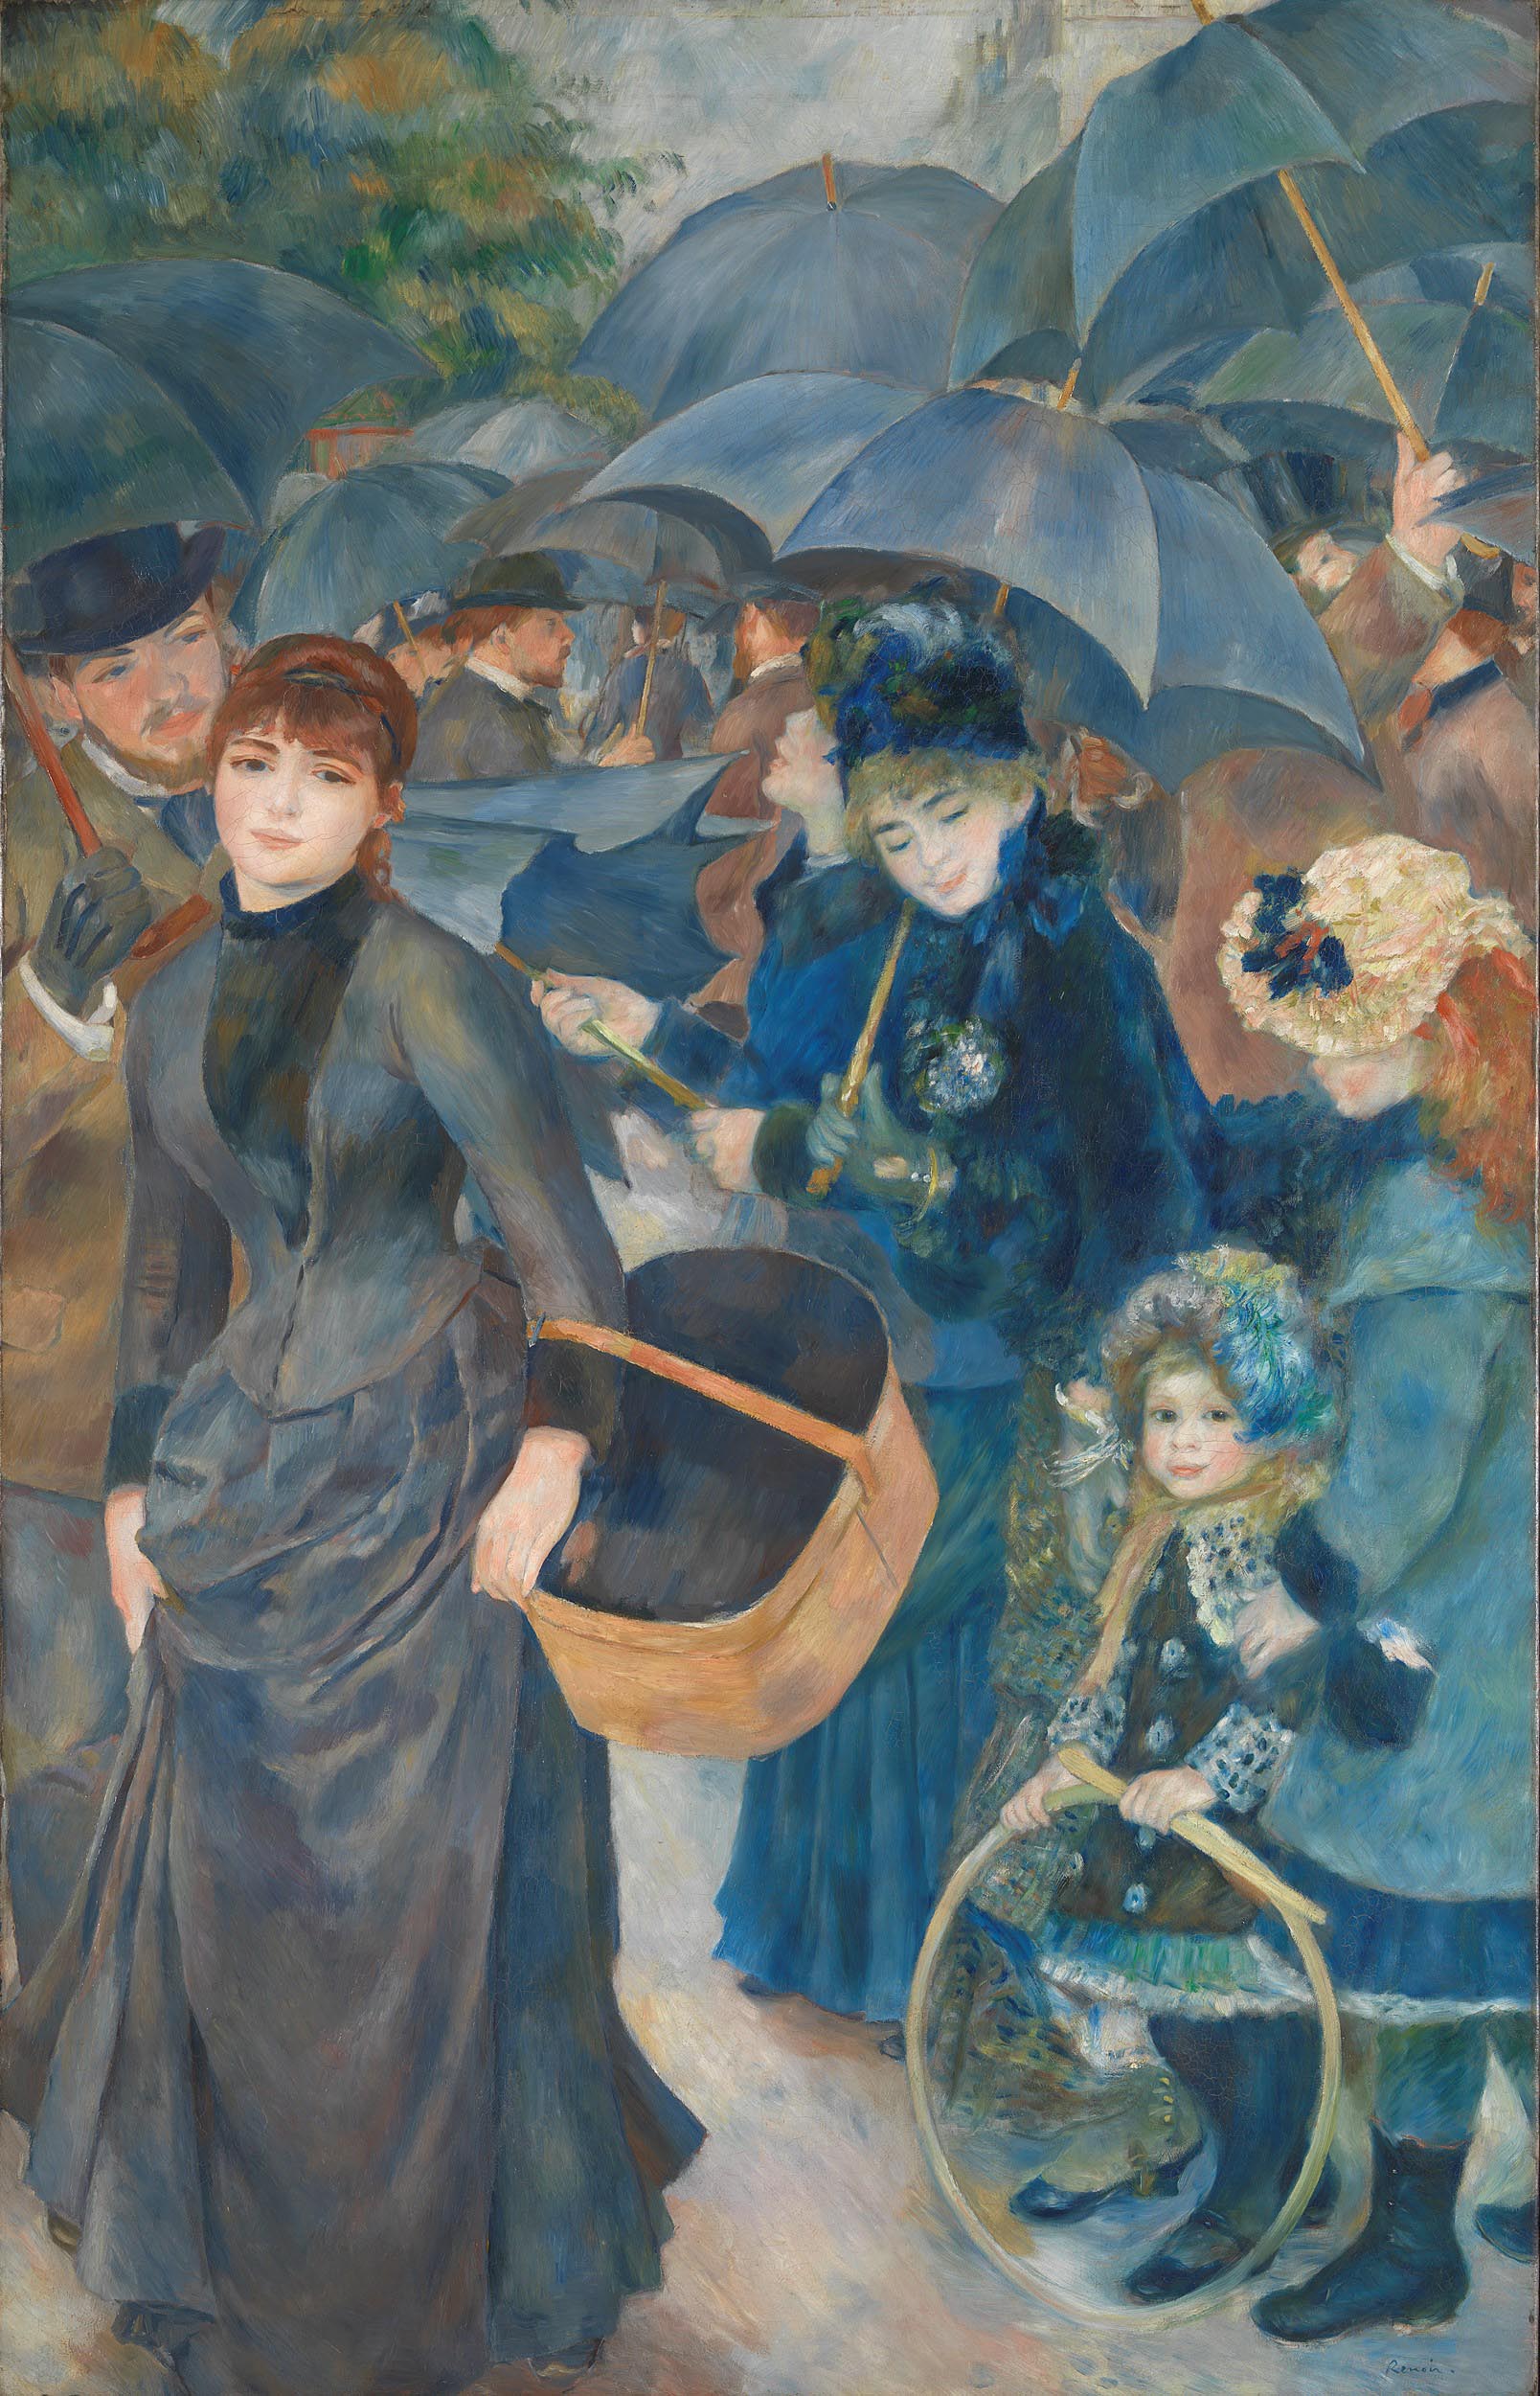 Renoir: Out of Hours Tour 